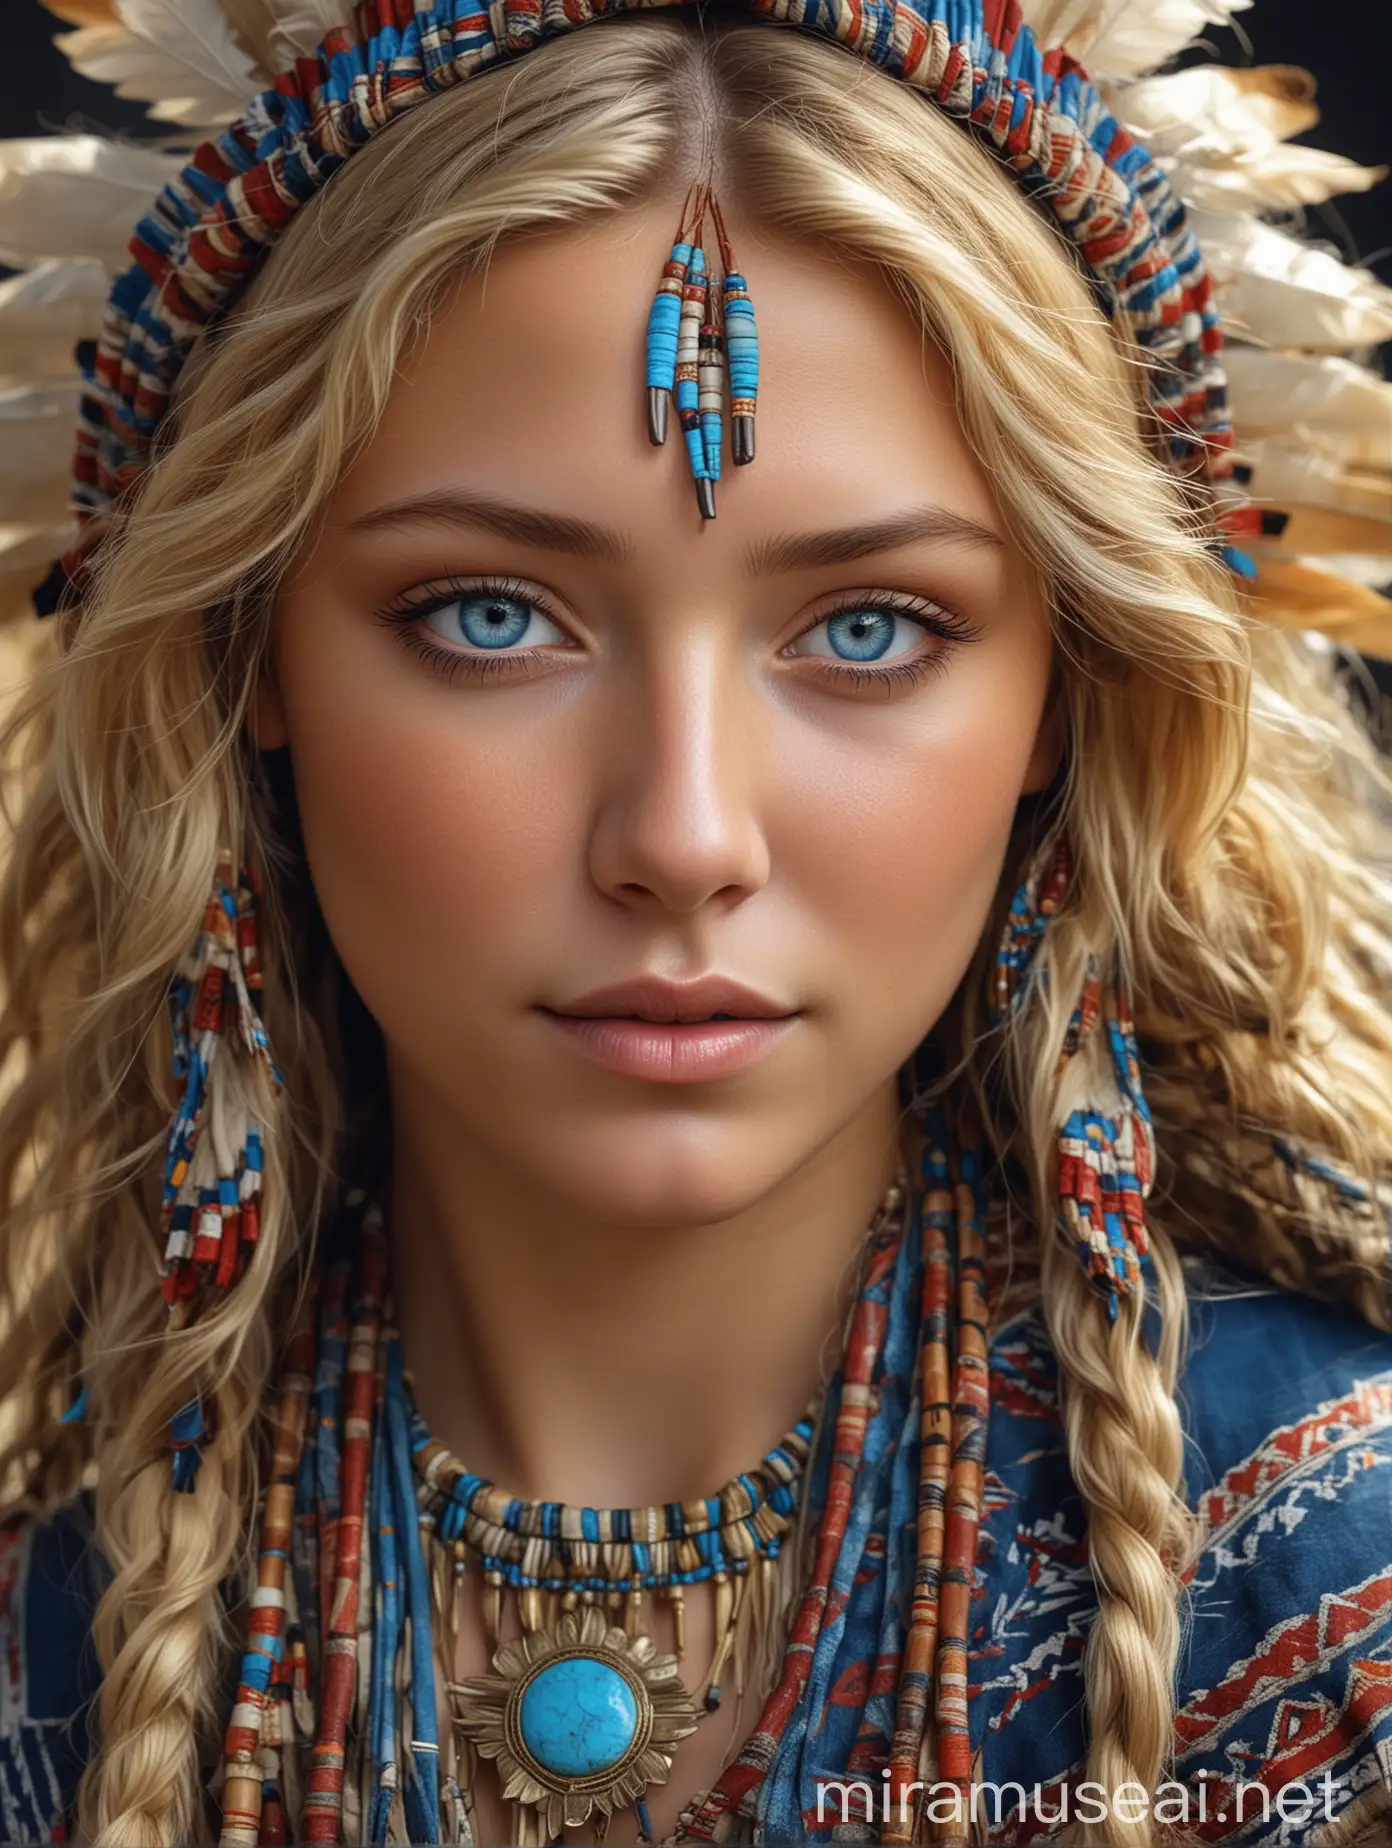 Stunning Portrait of a Young Woman in Exquisite Native American Attire